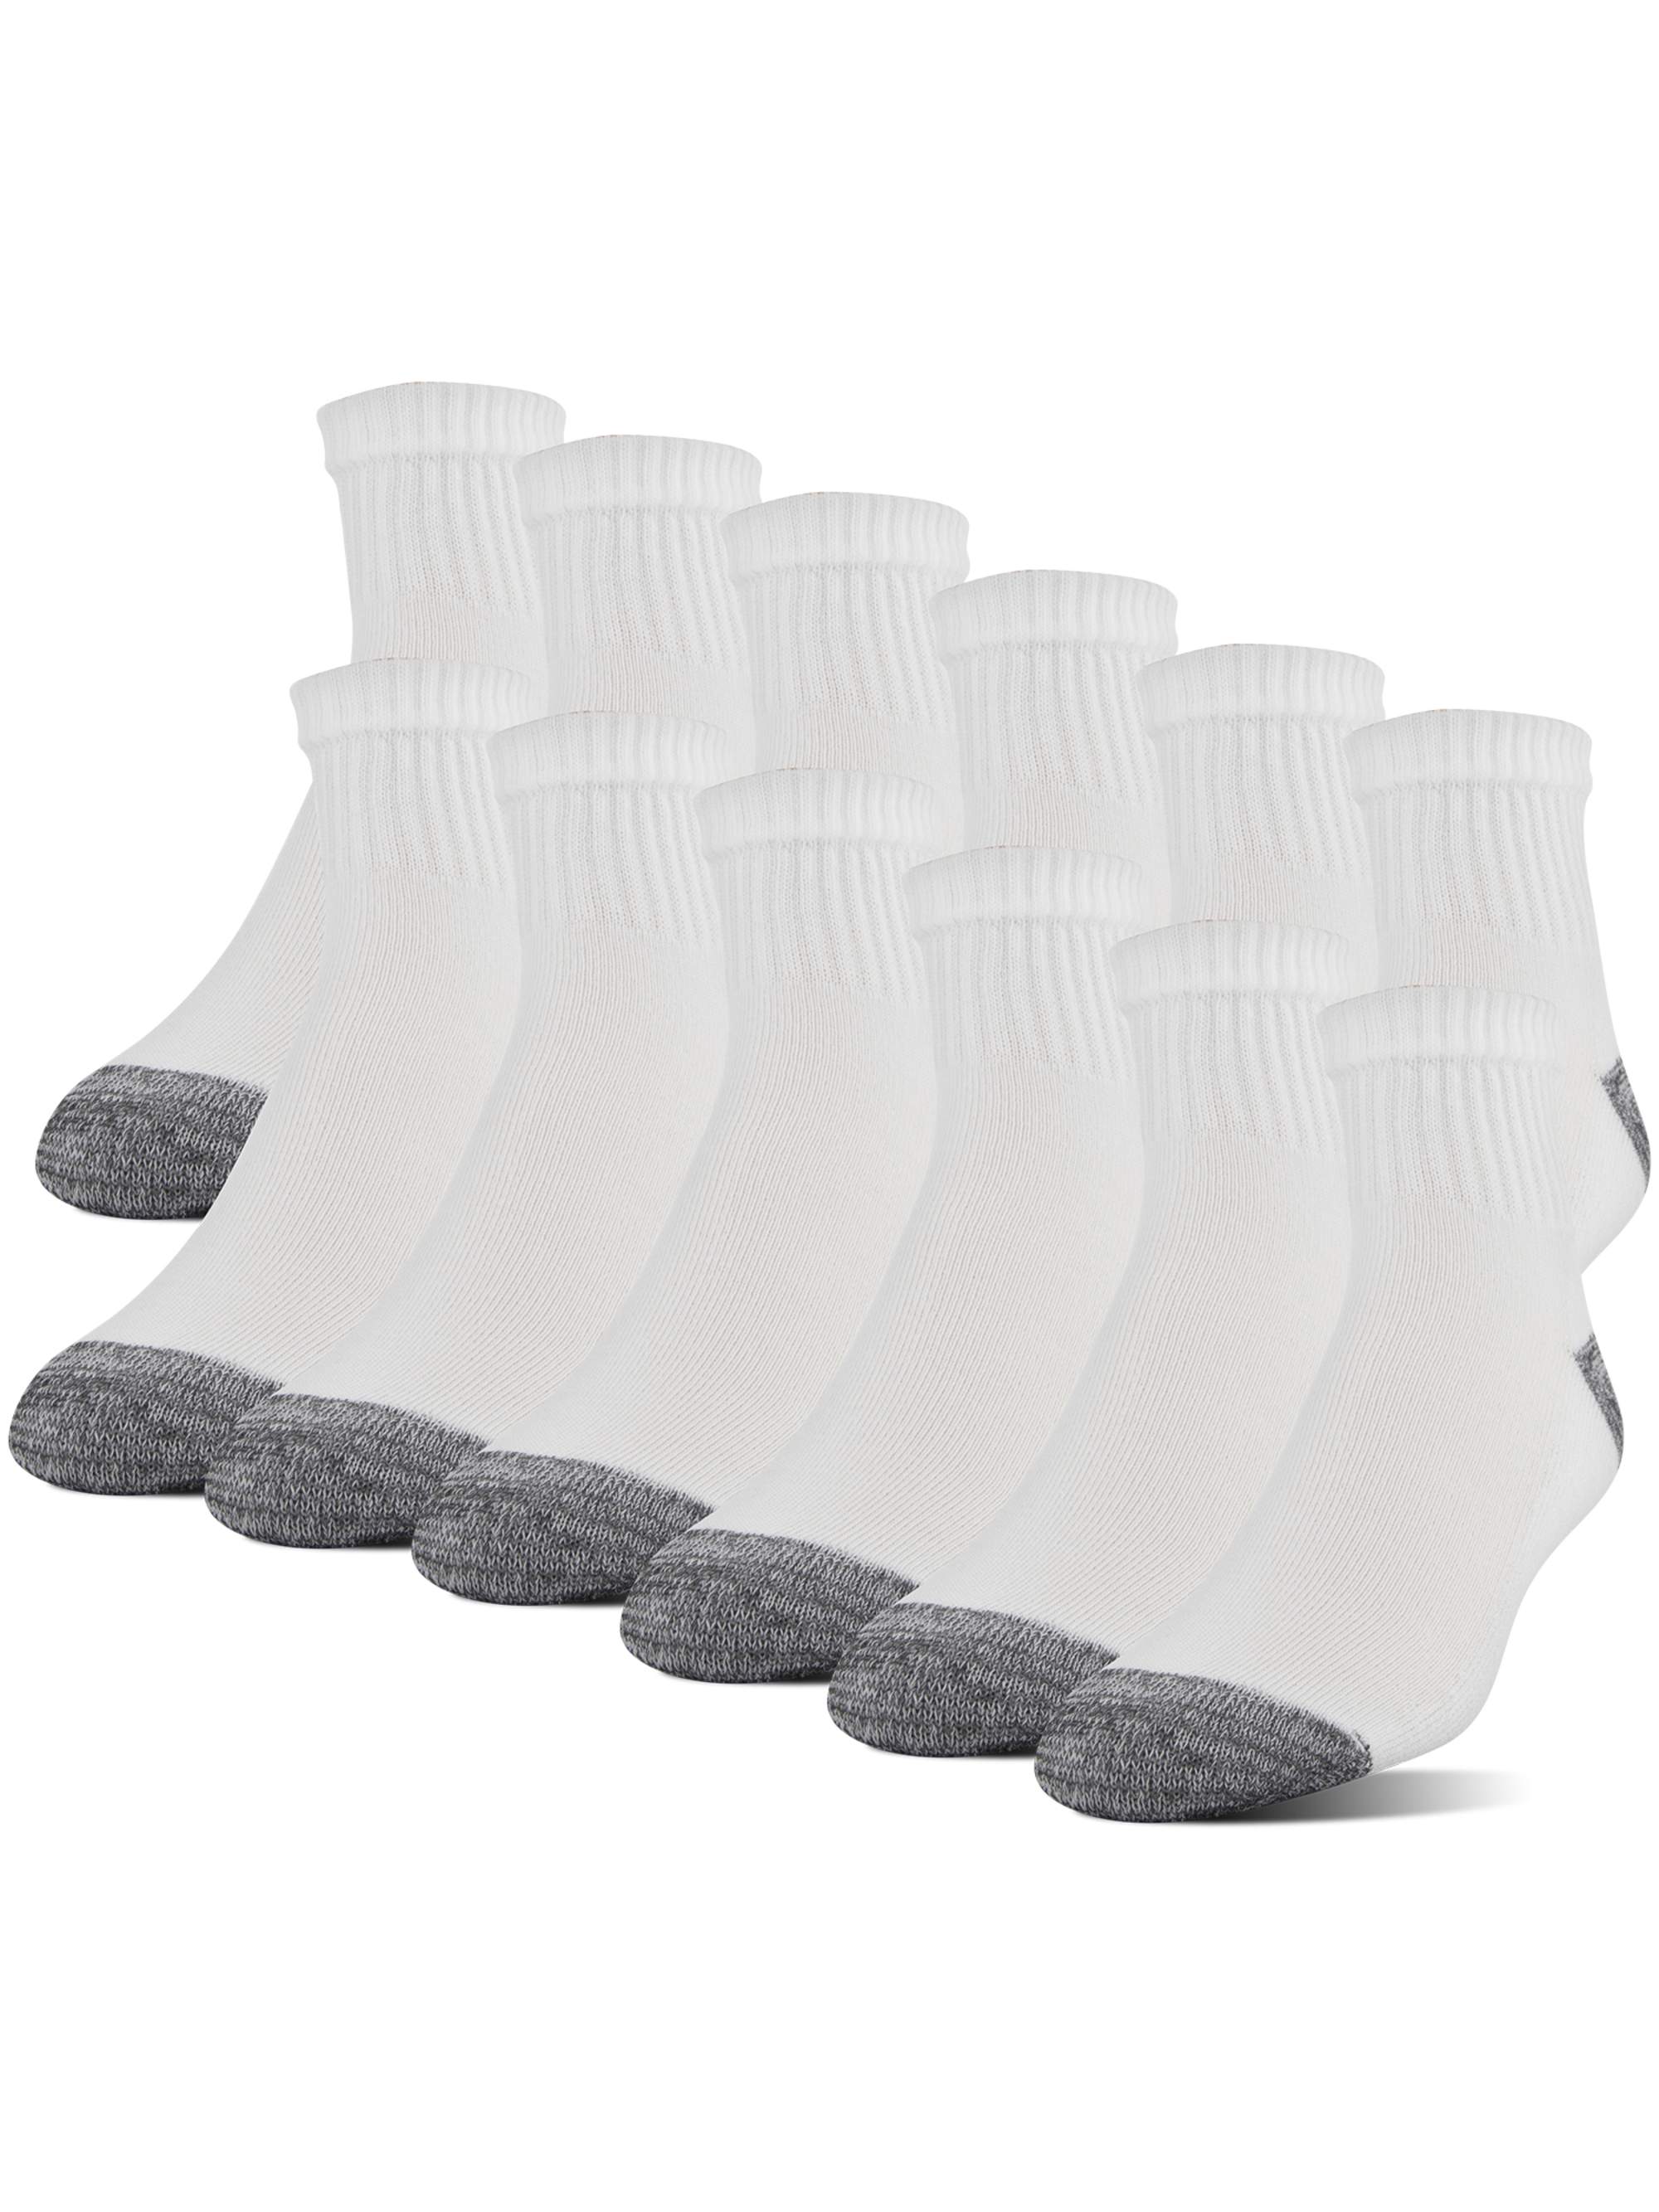 Gildan Adult Men's Half Cushion Terry Foot Bed Ankle Casual Socks, OS One Size, 12-Pack - image 1 of 2